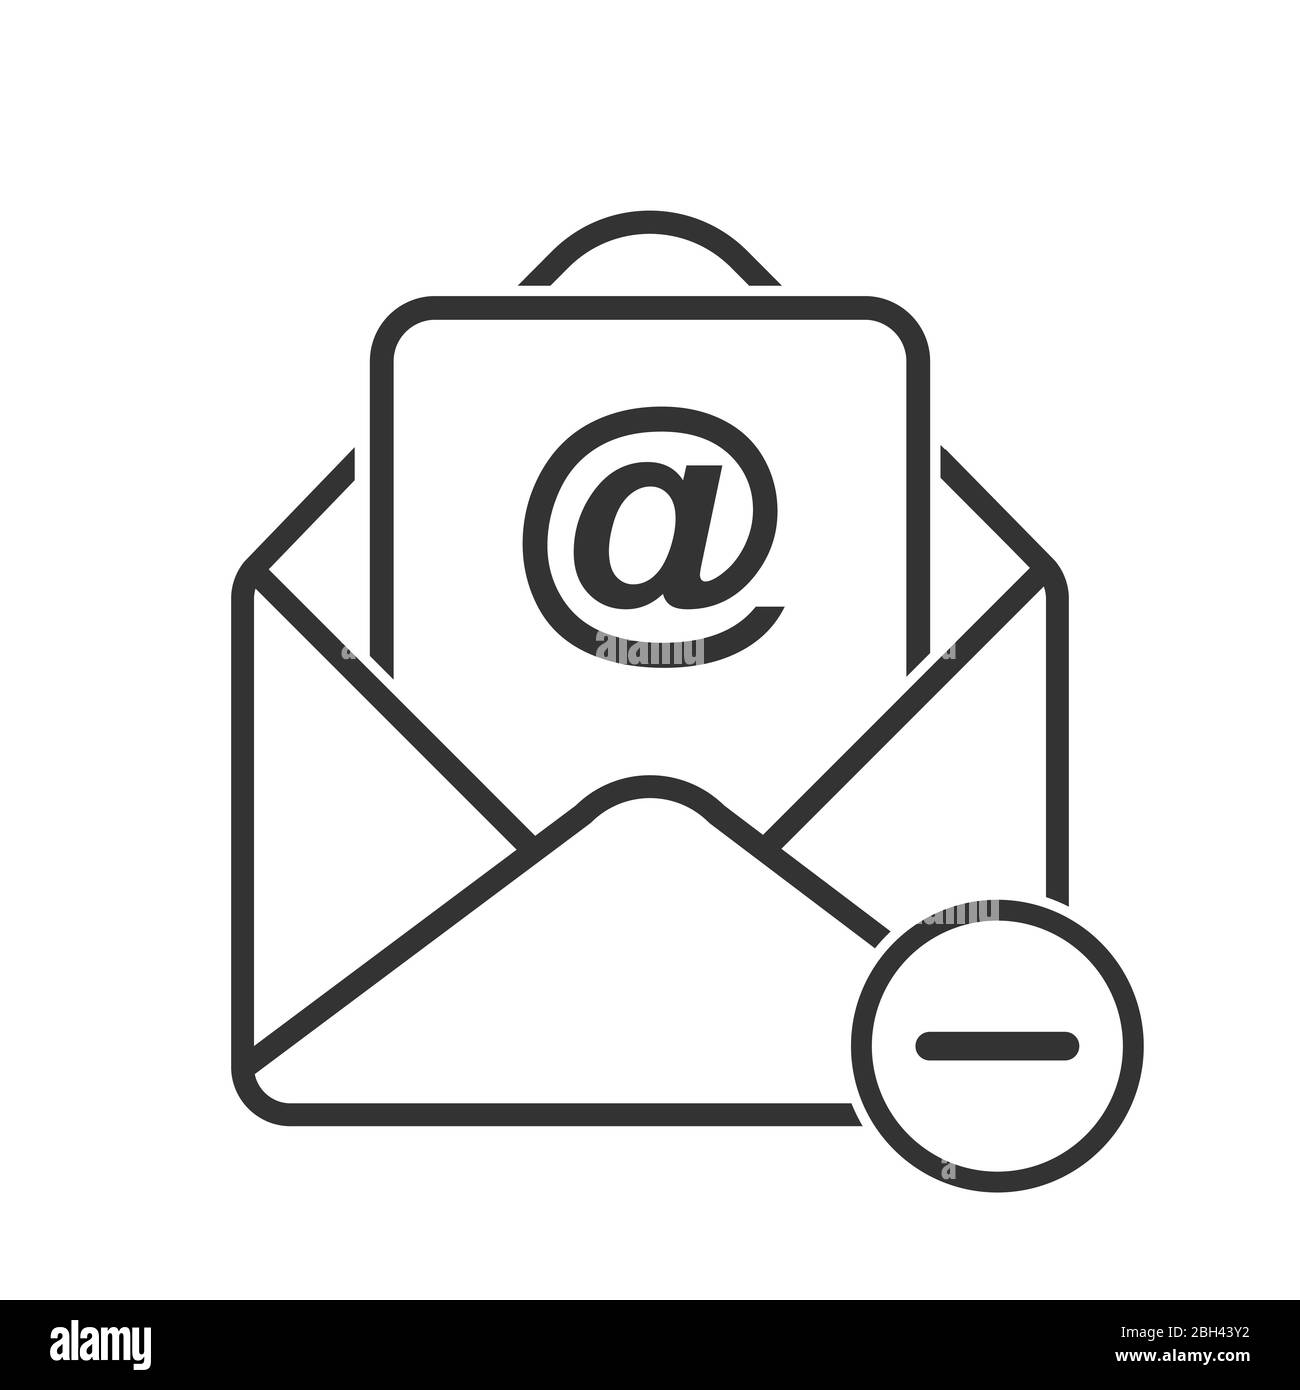 Simple vector mail icon, delete email. Stock design isolated on a white background for websites and apps, empty outline. Stock Vector